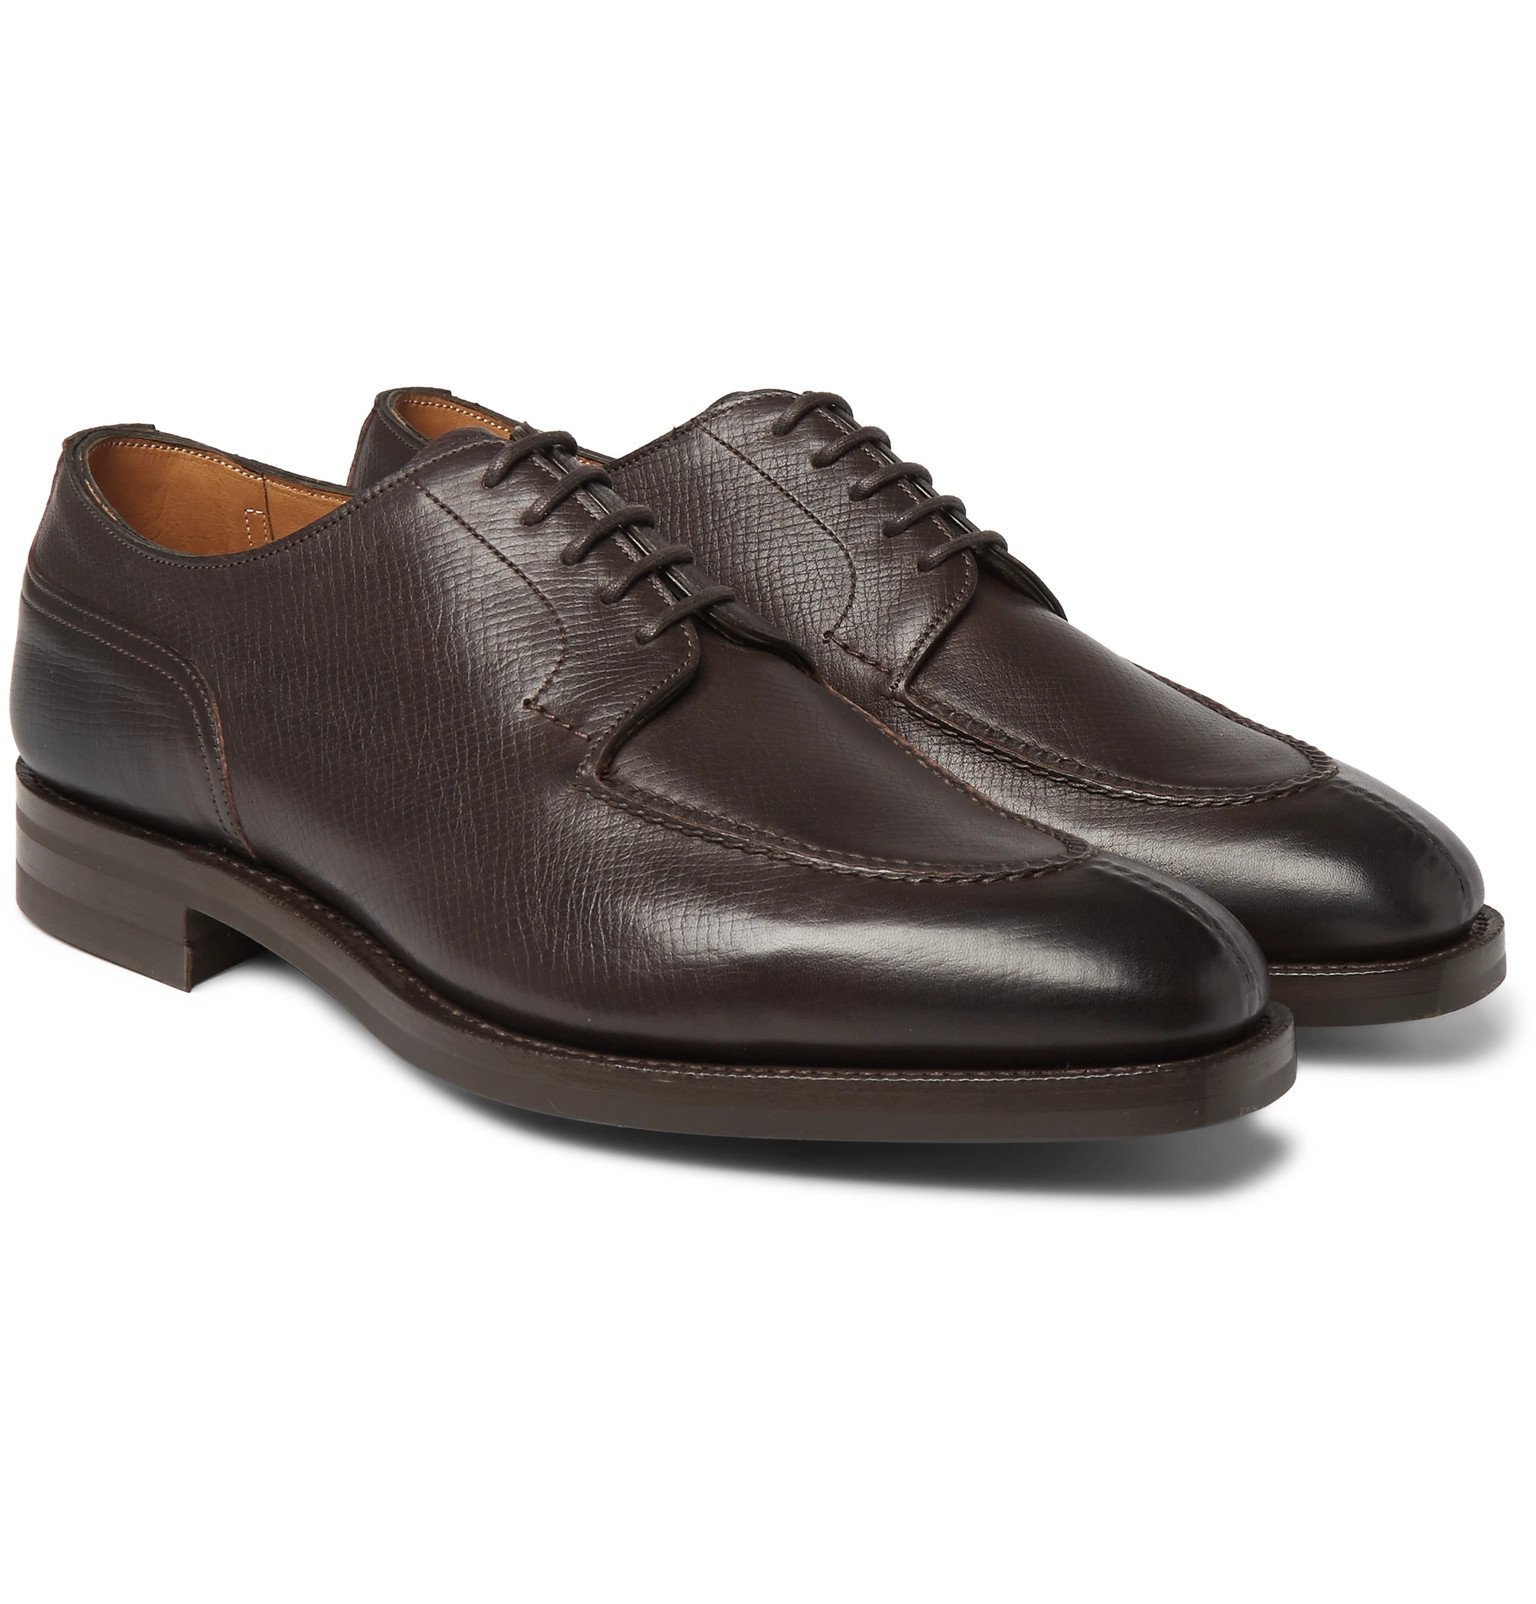 Edward Green - Dover Suede Derby Shoes - Brown Edward Green